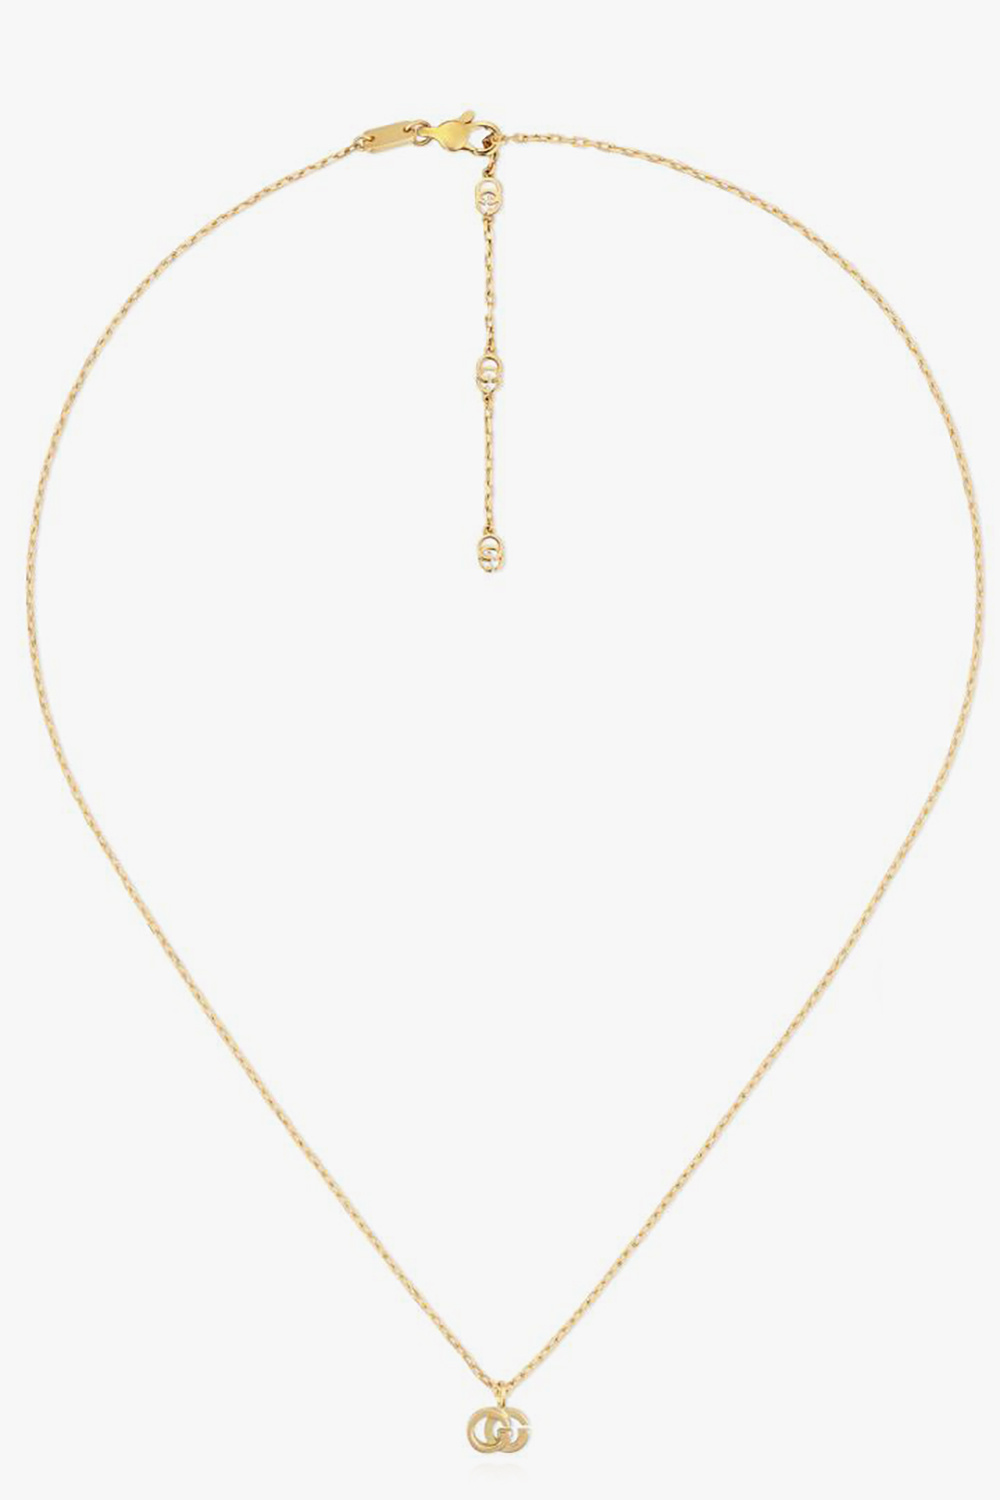 Gucci Gold necklace